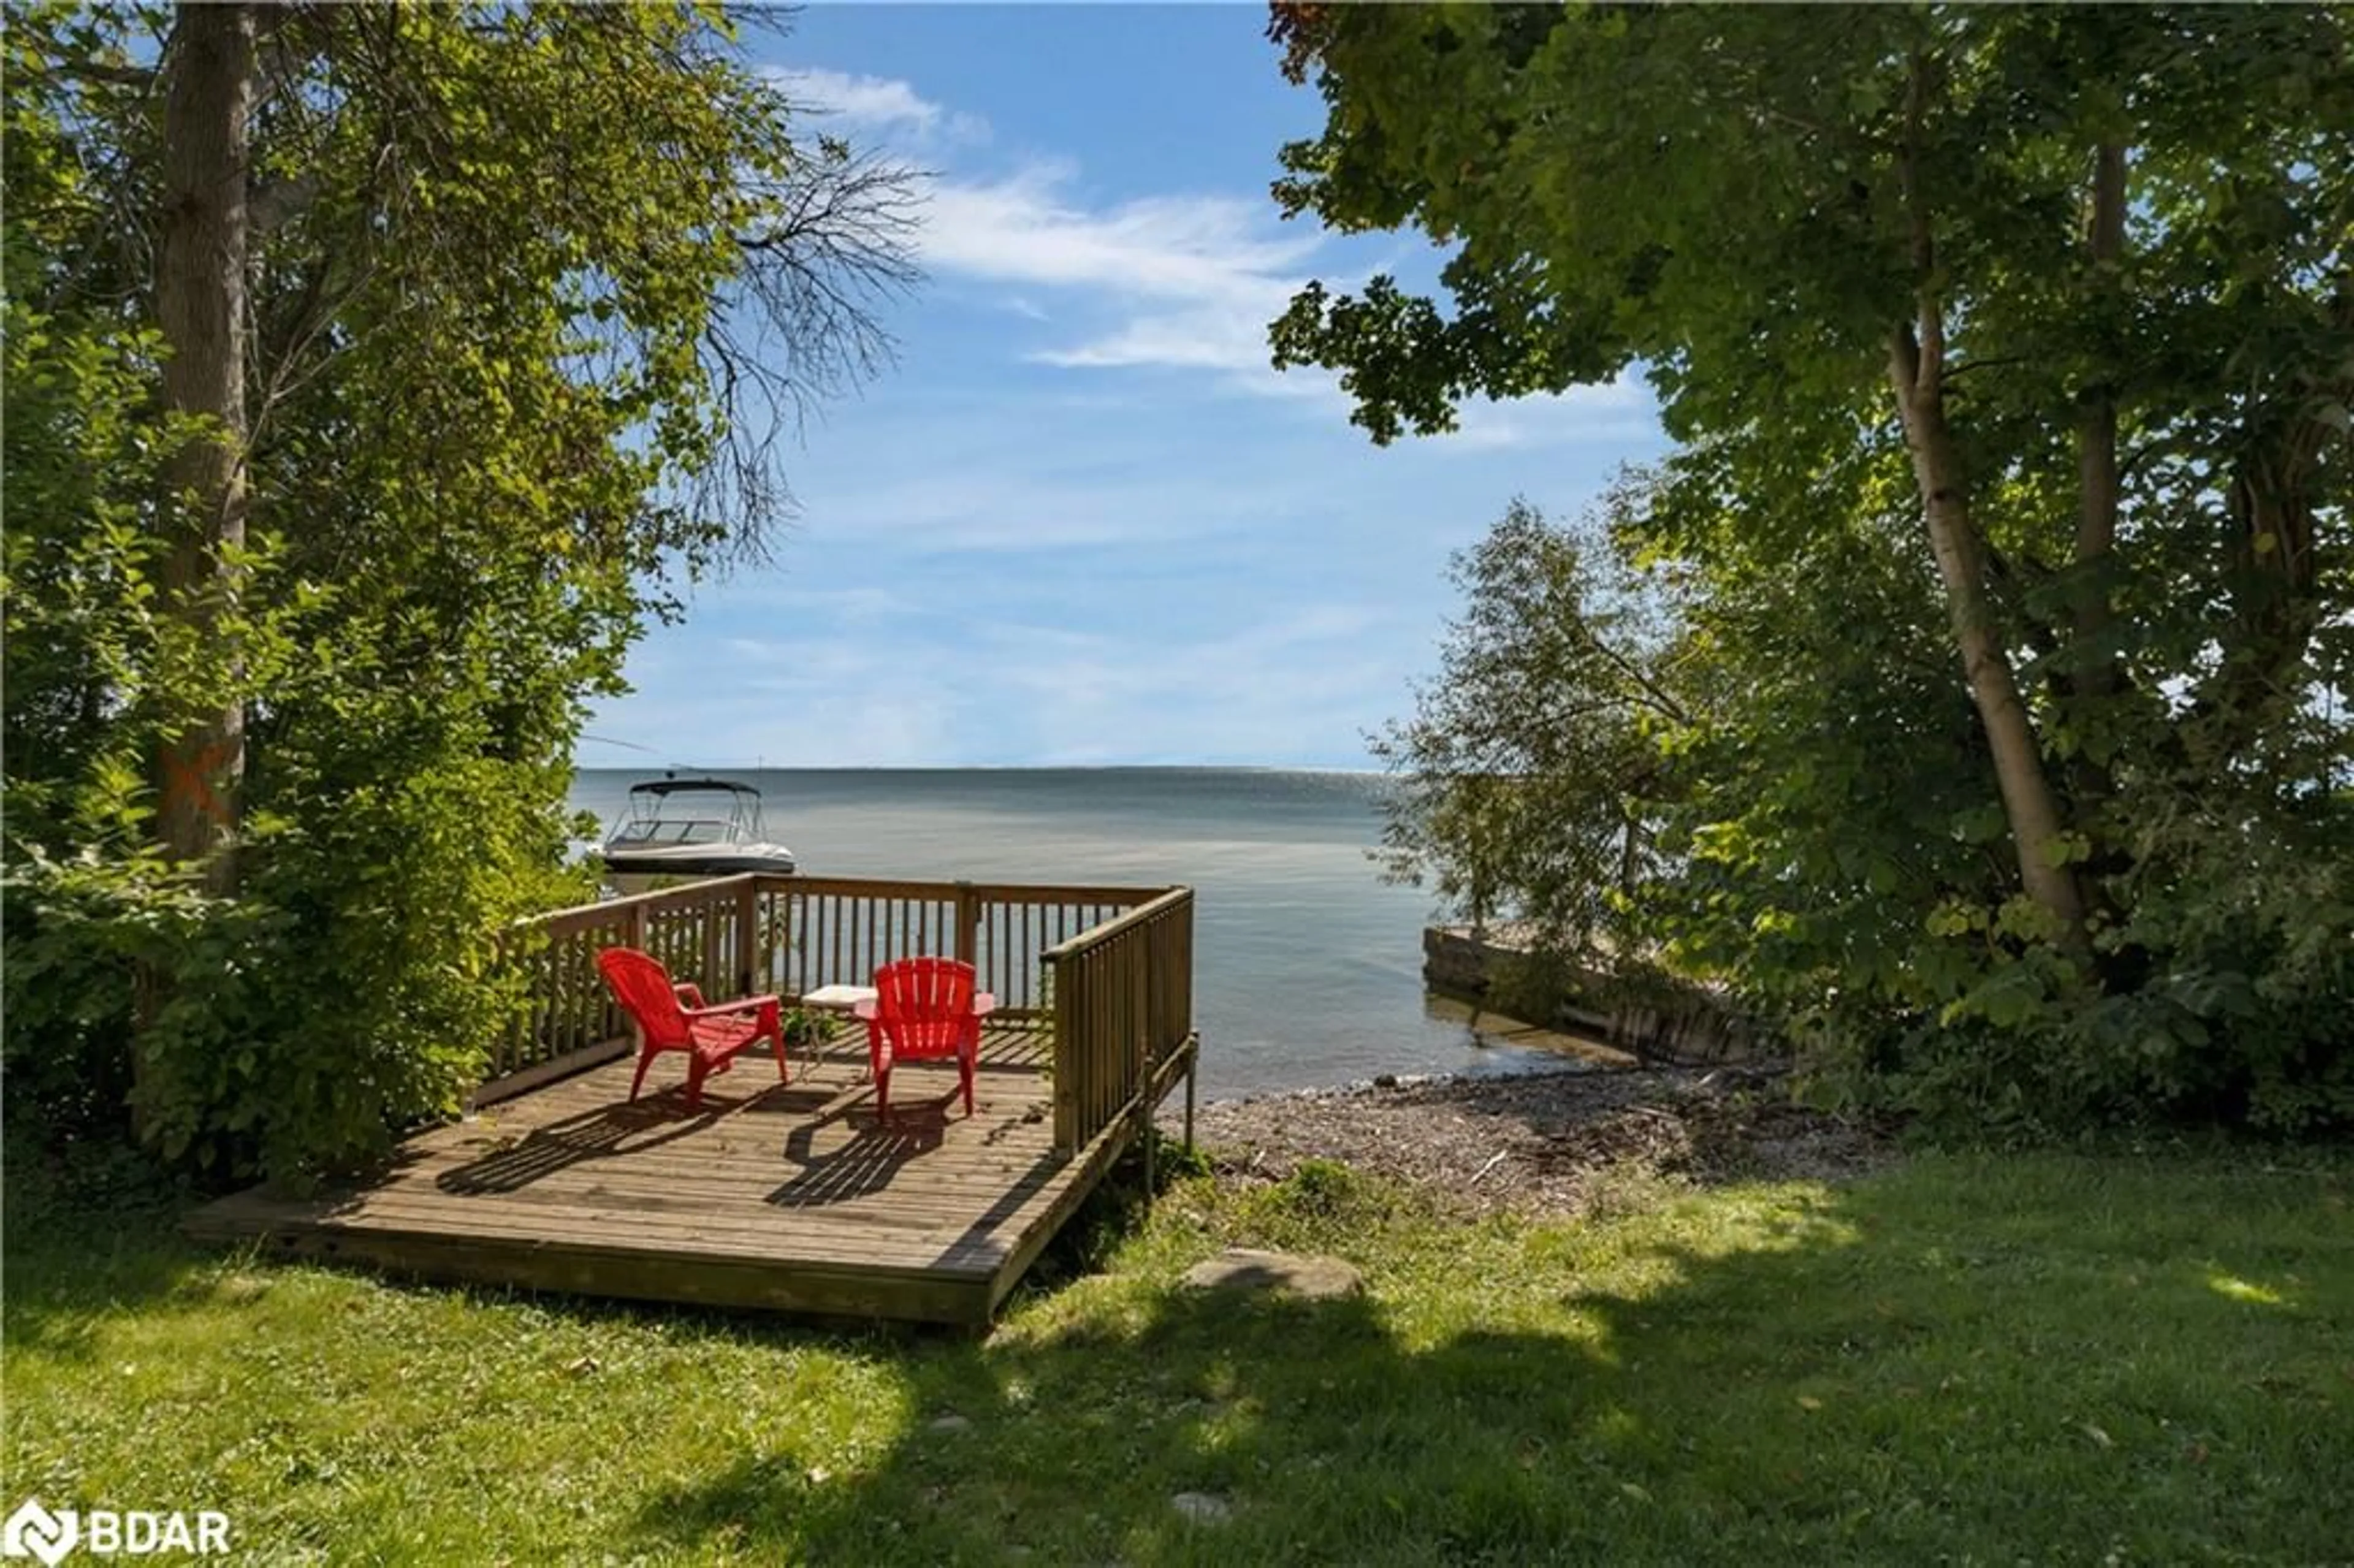 Lakeview for 61 Stanley Ave, Oro-Medonte Ontario L0L 1T0